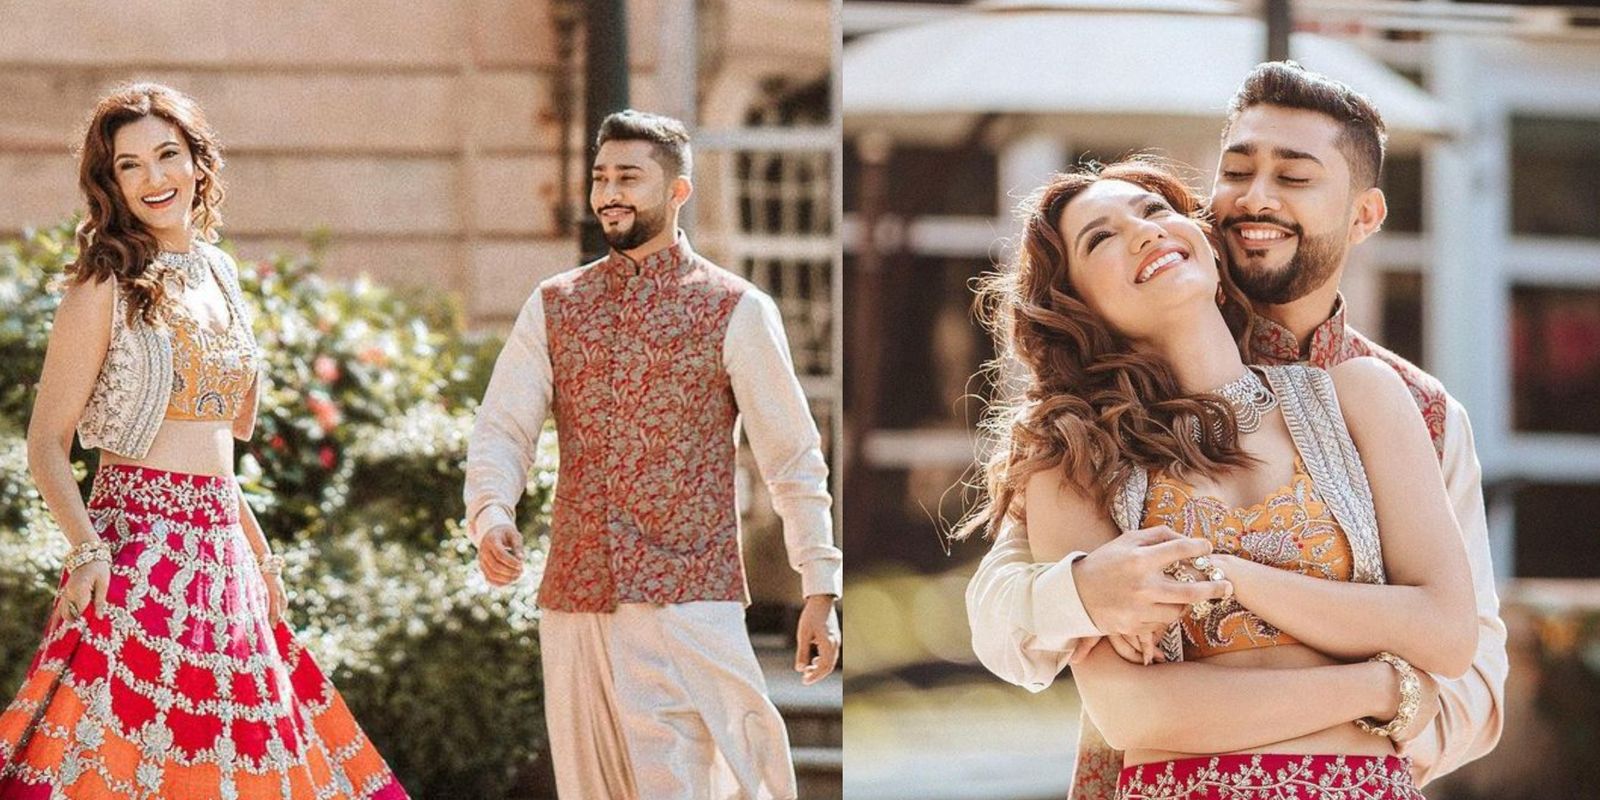 Gauahar Khan And Zaid Darbar To Tie The Knot On December 25, Actress Drops The Big News With Stunning Pre-Wedding Photos